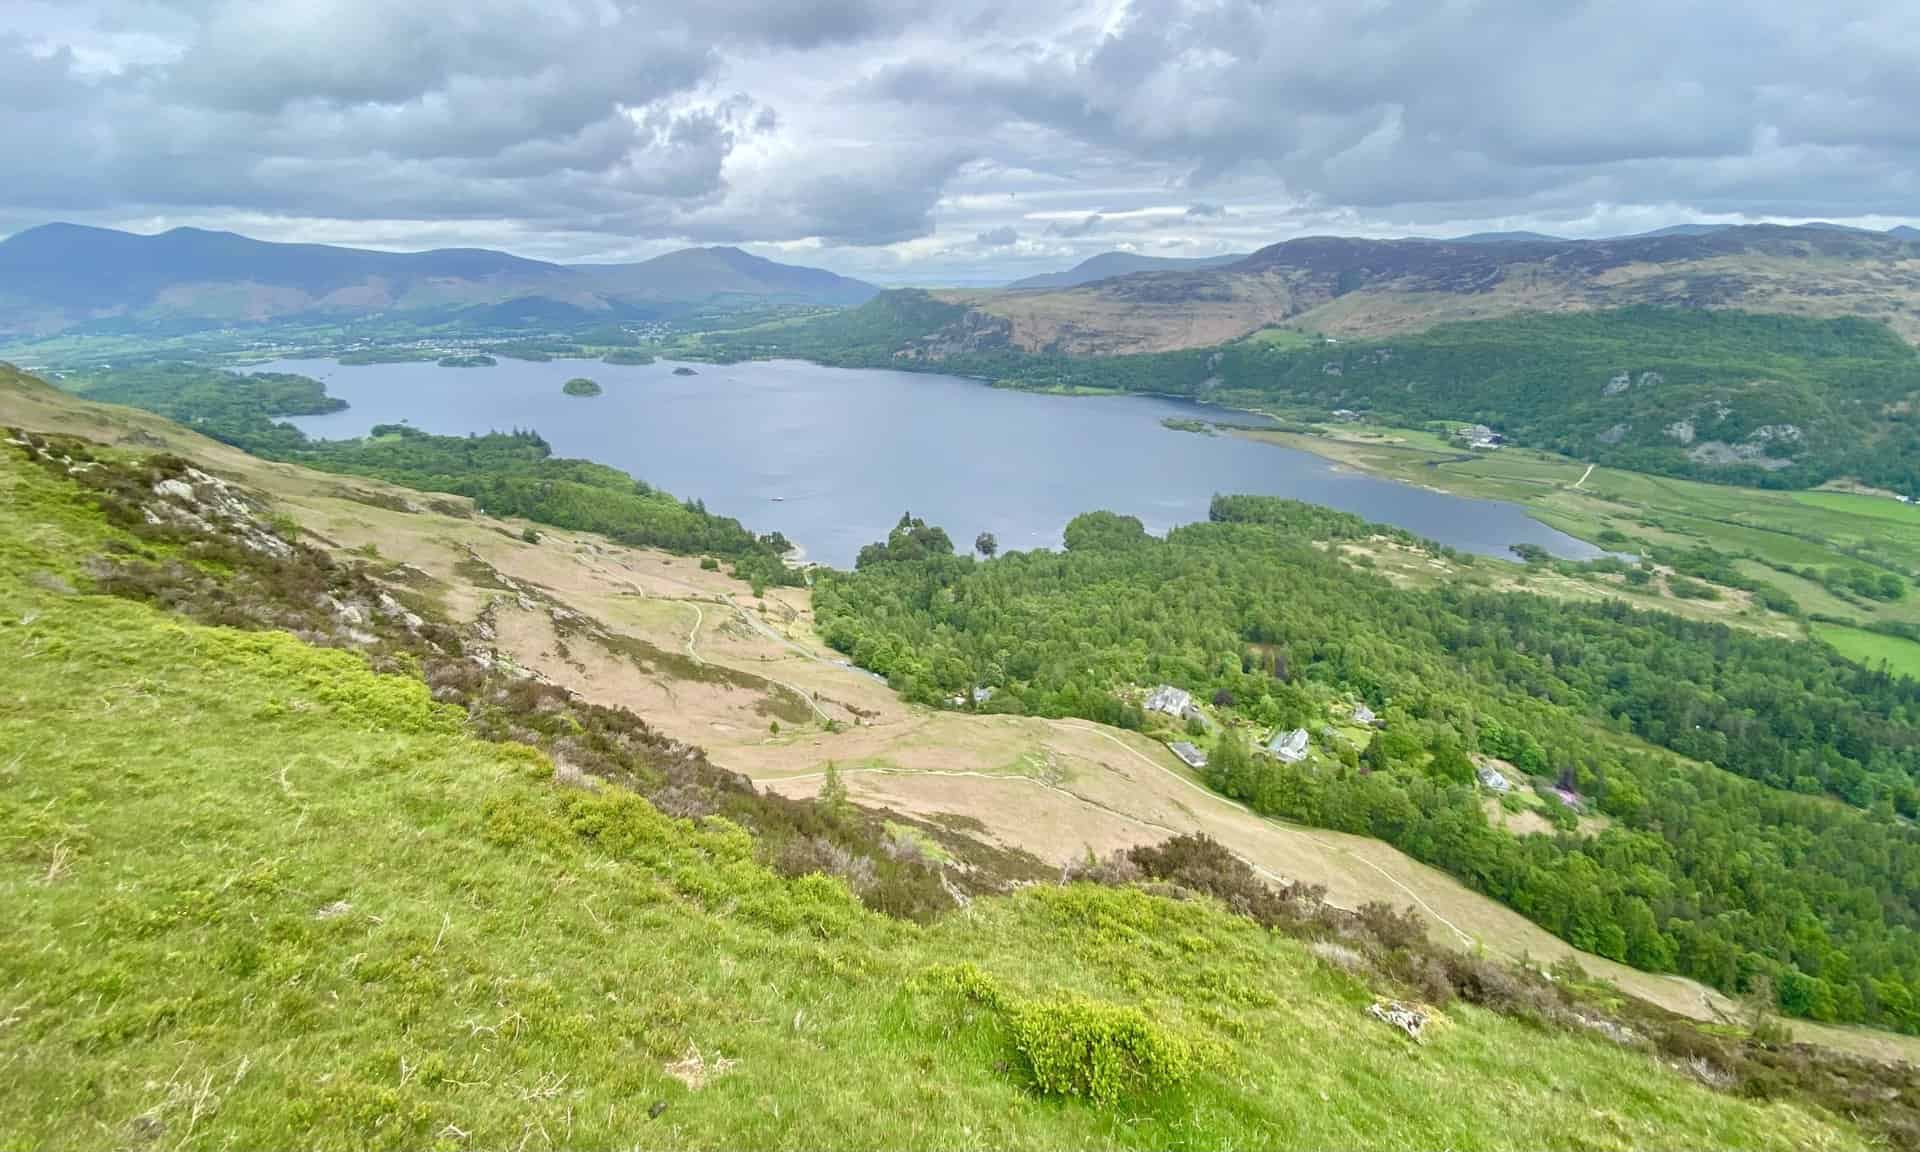 The full extent of Derwent Water. Keswick is situated on its northern shores with Skiddaw and Blencathra in the background.